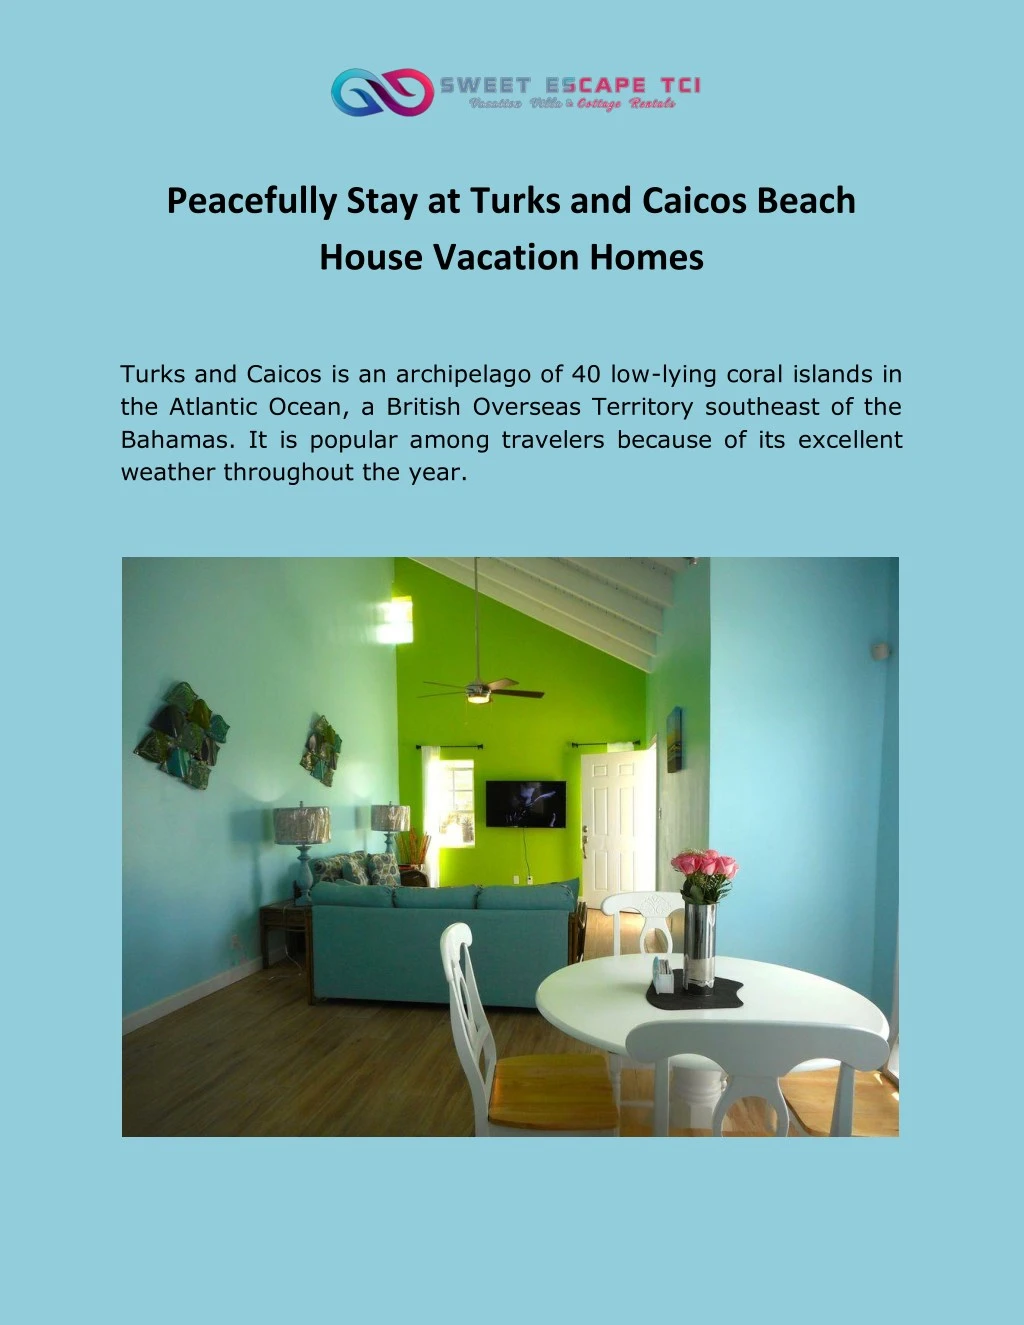 peacefully stay at turks and caicos beach house